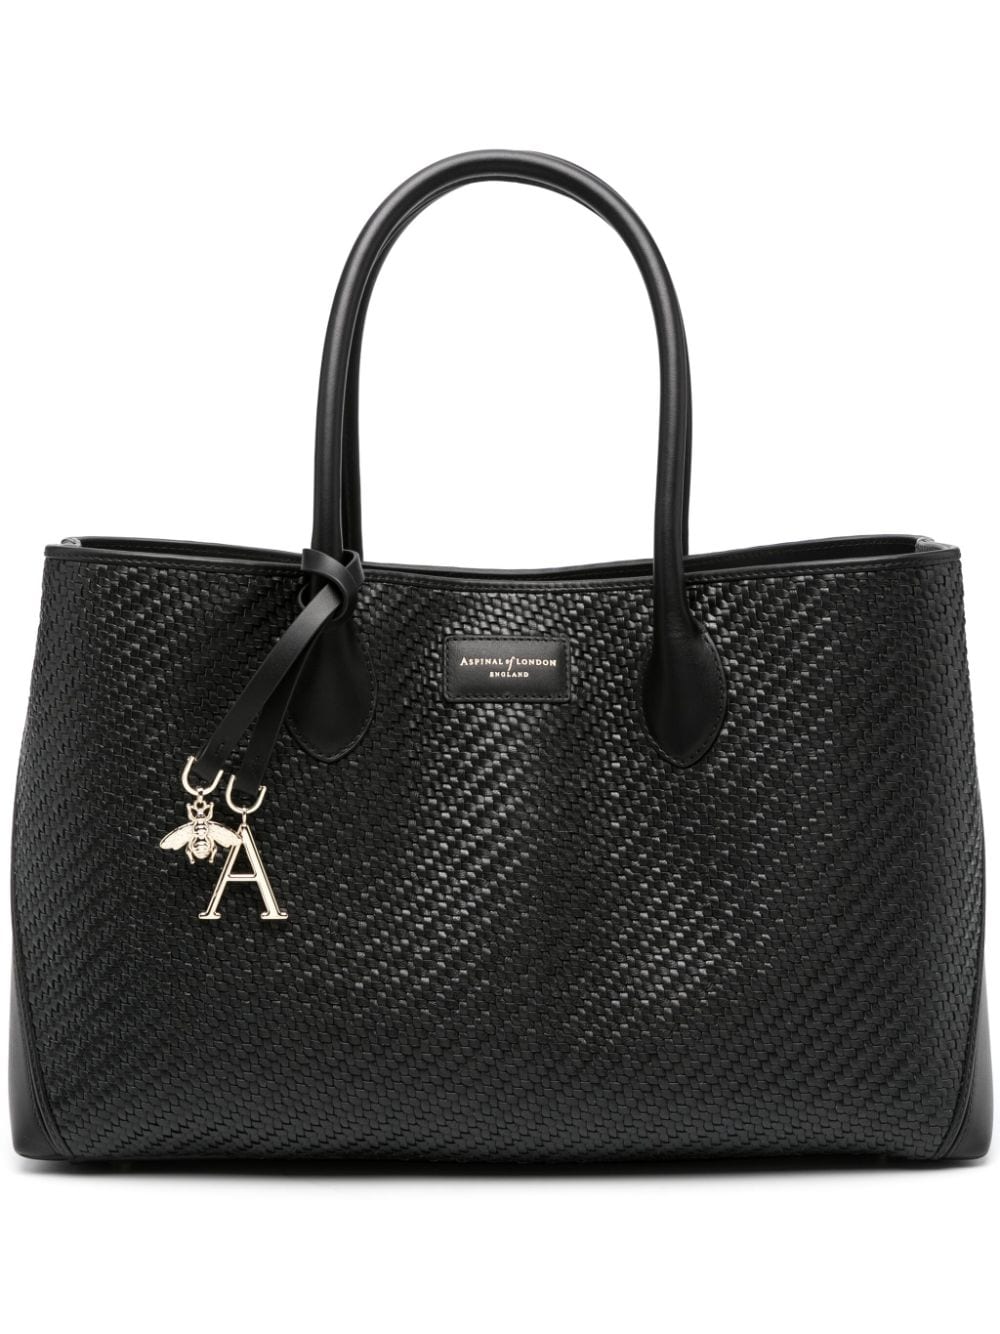 Aspinal Of London London weave leather tote bag - Black von Aspinal Of London